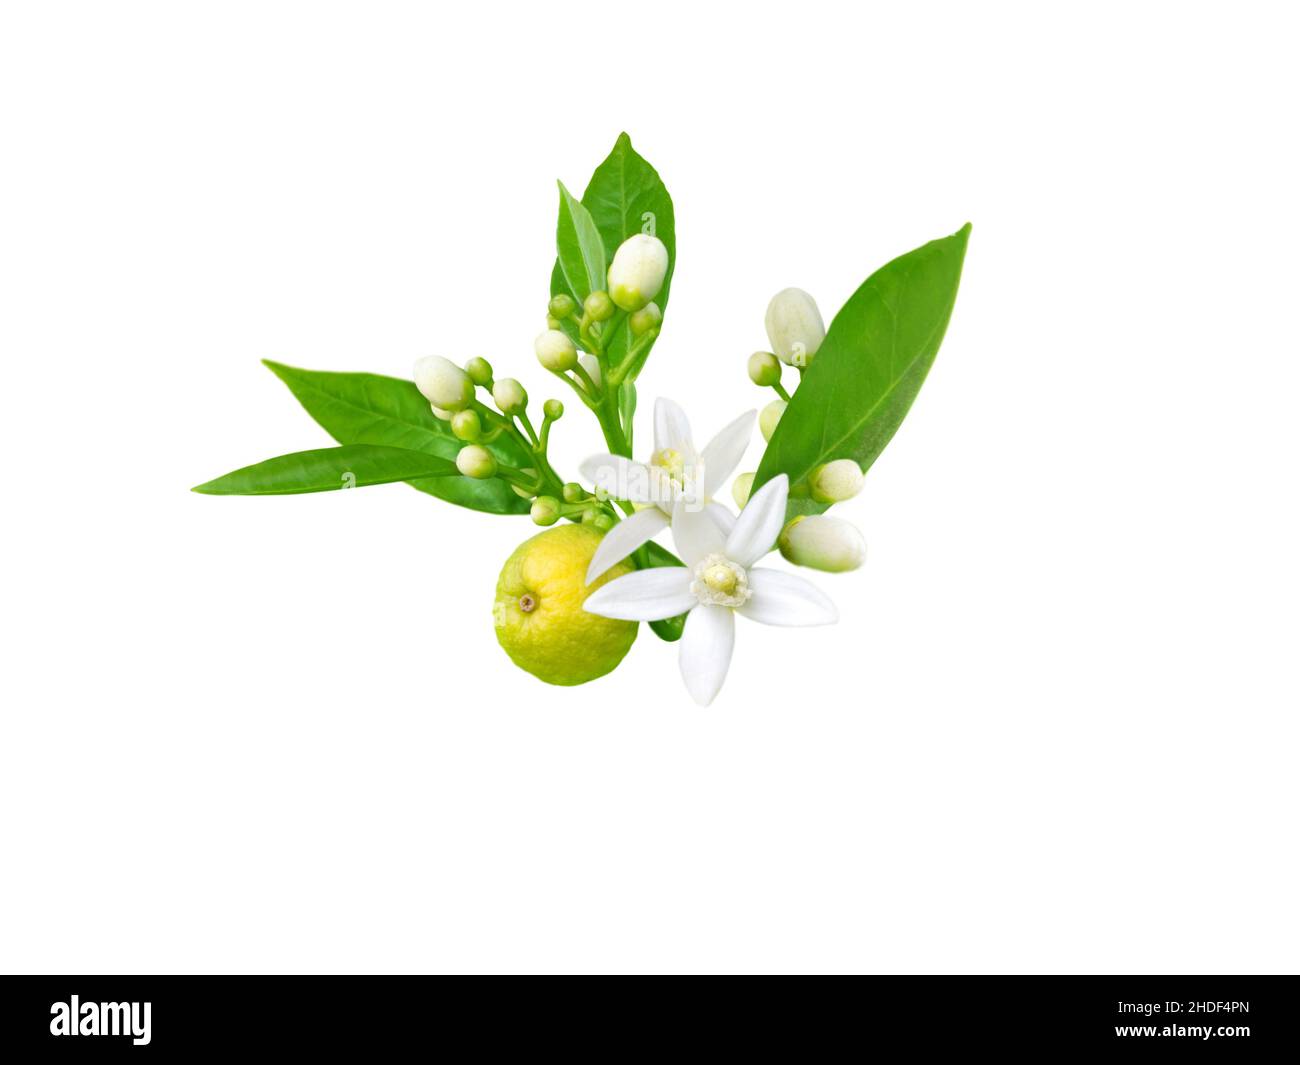 Branch of orange tree with white fragrant flowers, buds, leaves and fruit isolated on white. Neroli blossom. Stock Photo